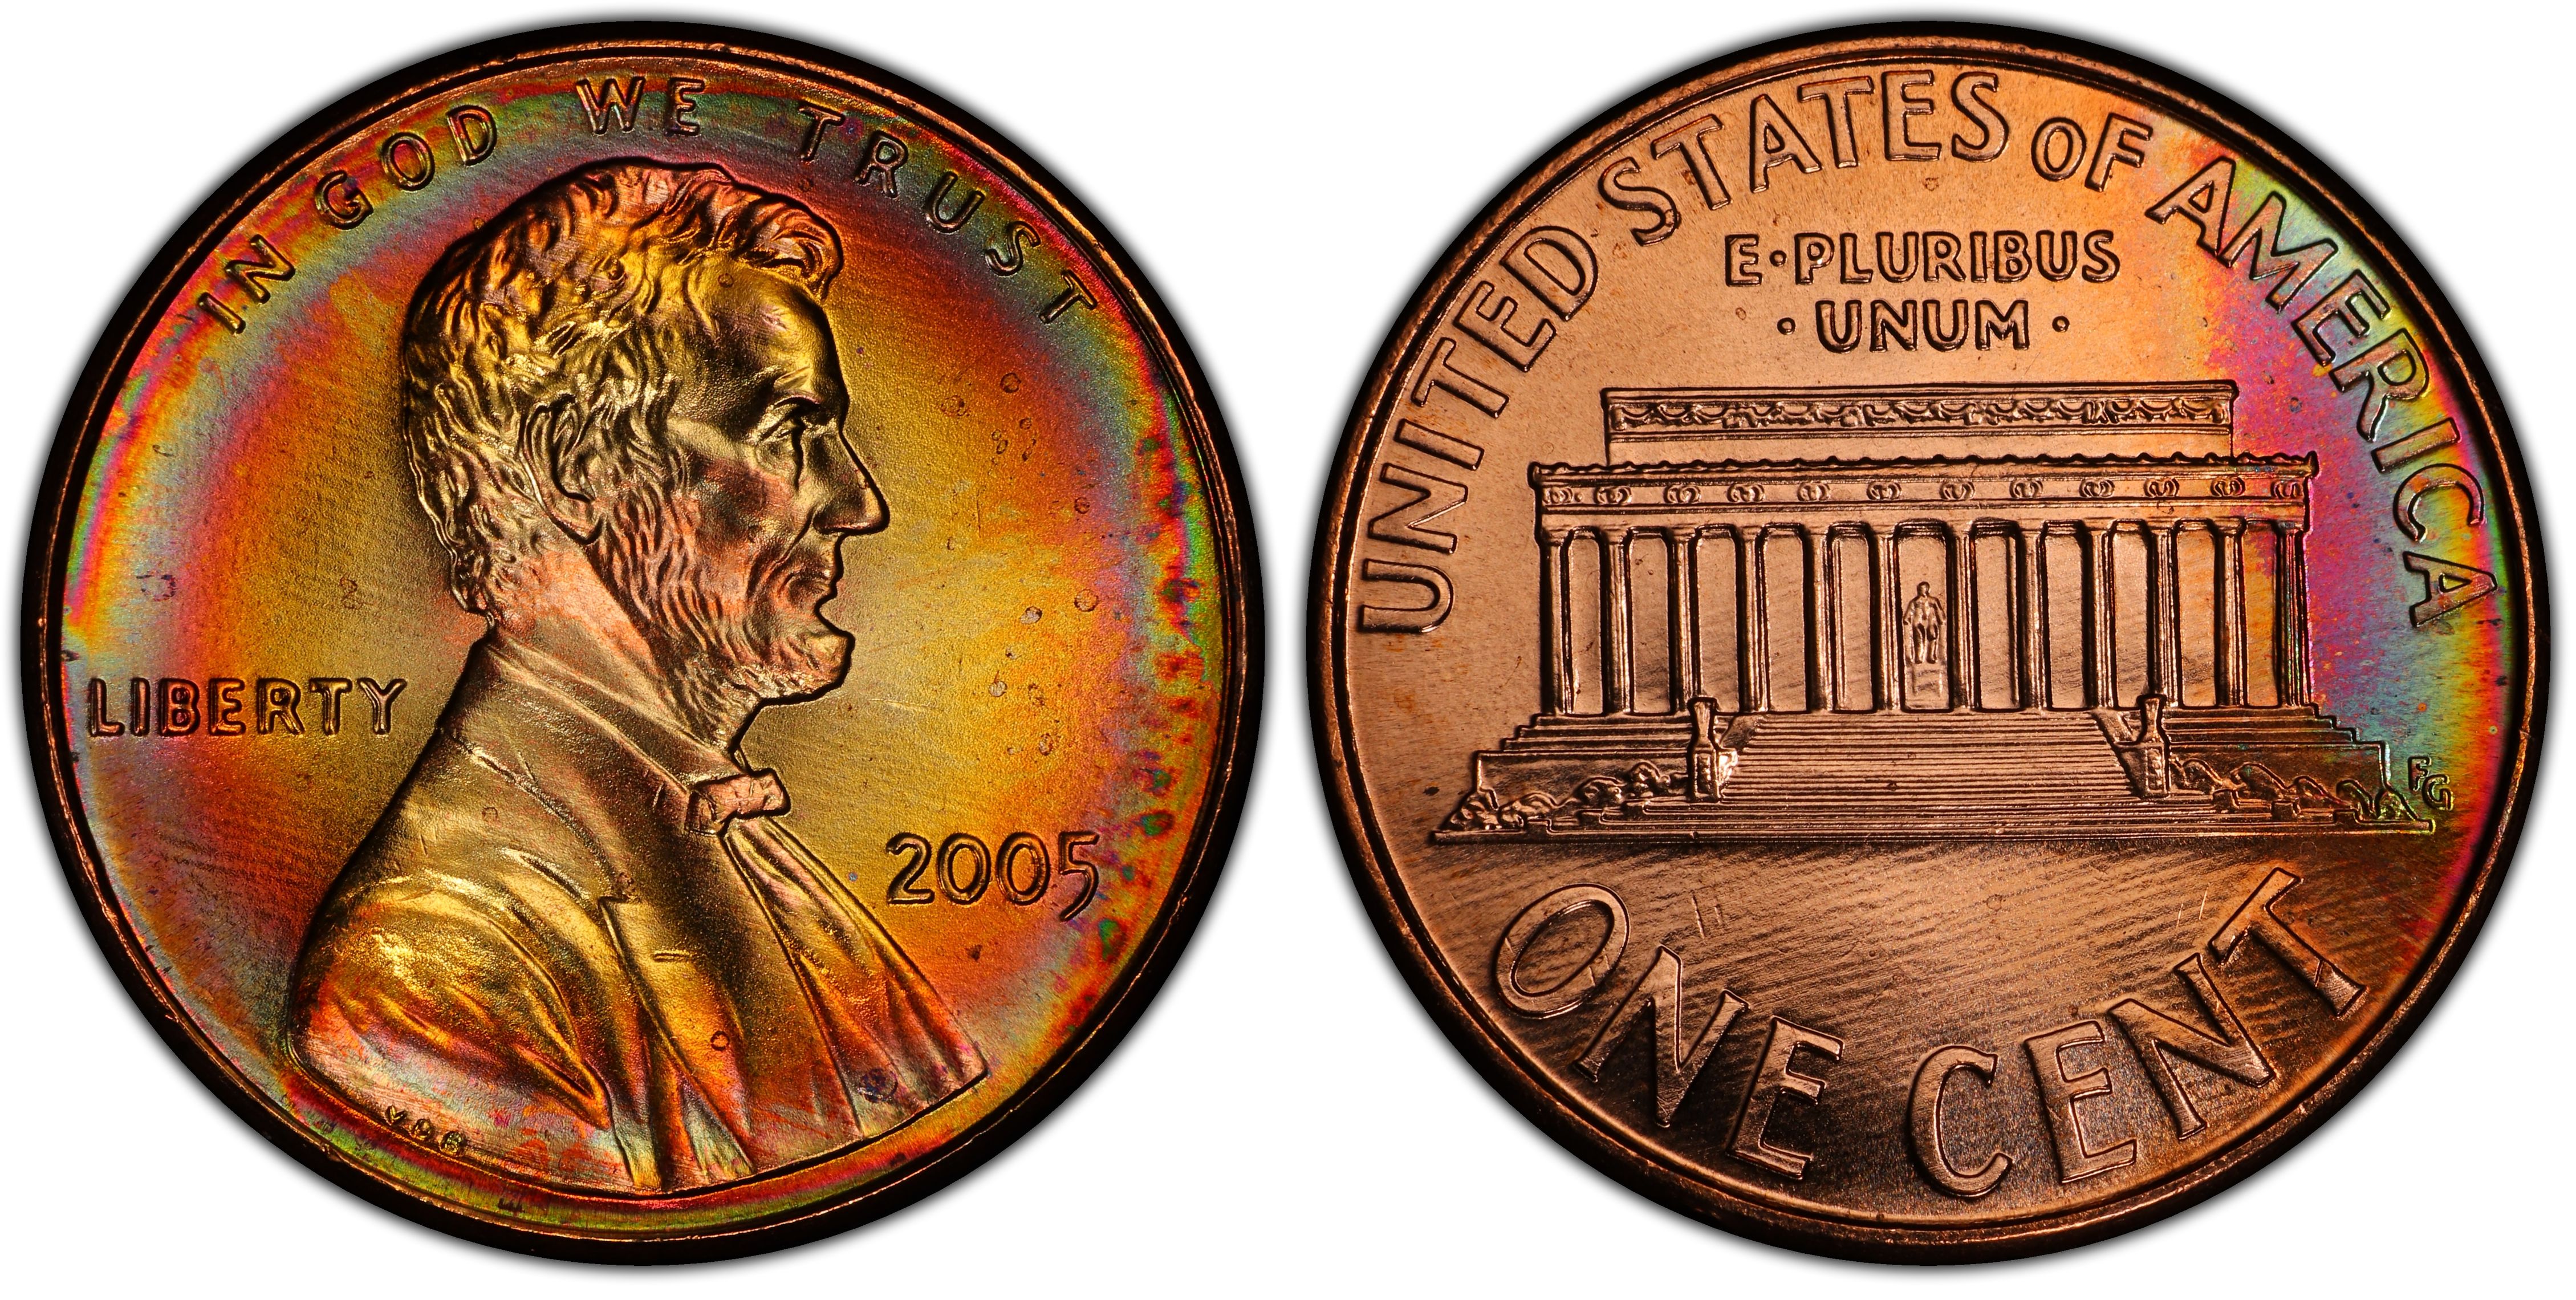 https://images.pcgs.com/CoinFacts/81634364_121531218_2200.jpg